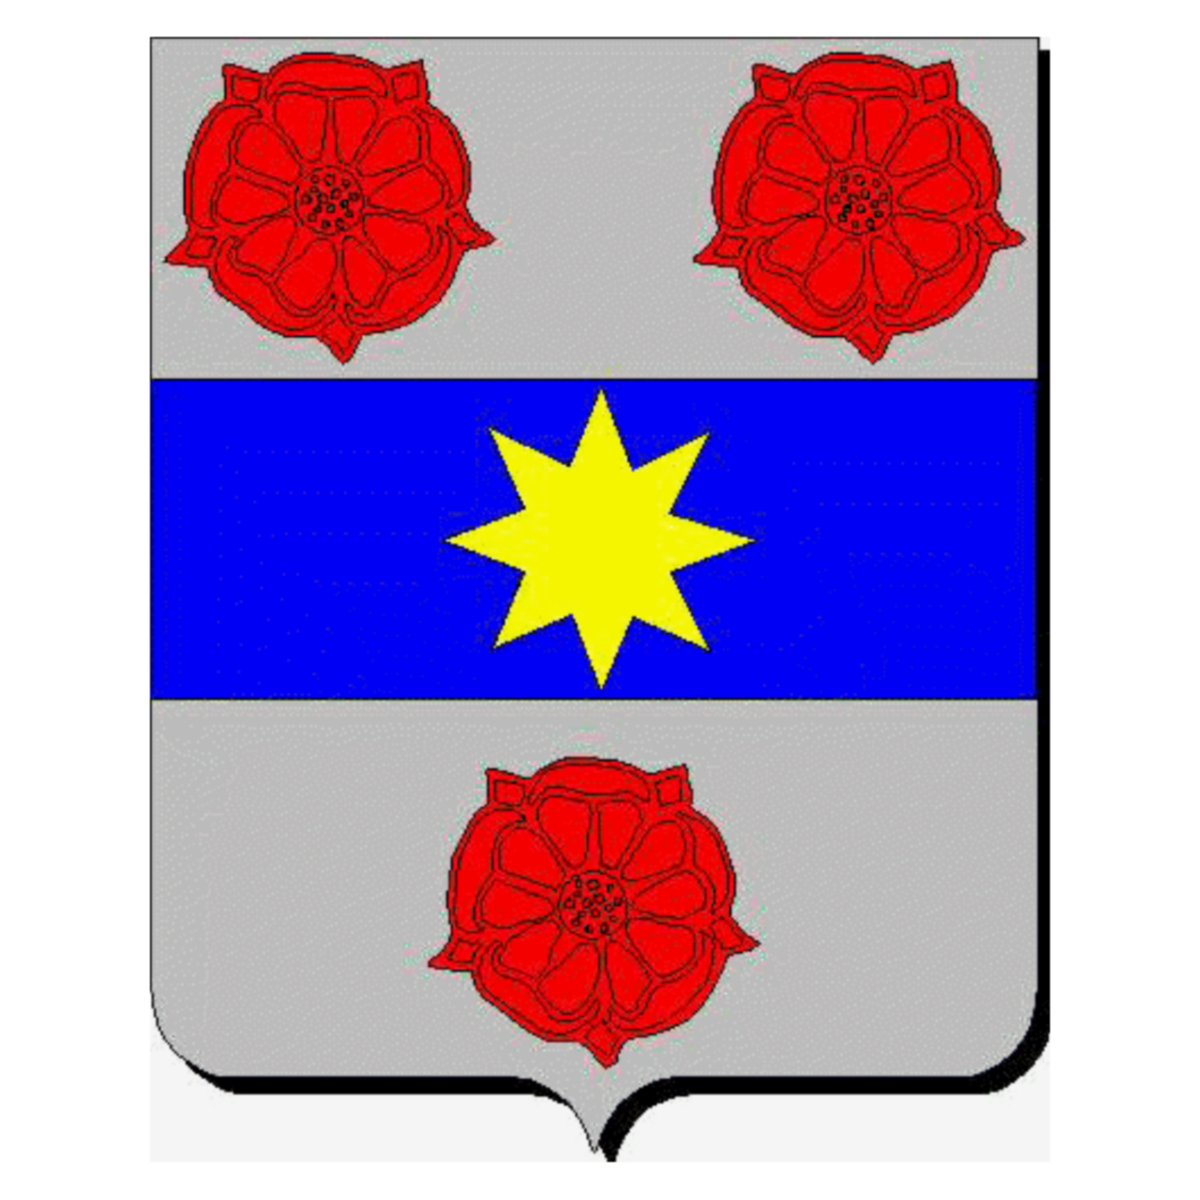 Coat of arms of familyNeve